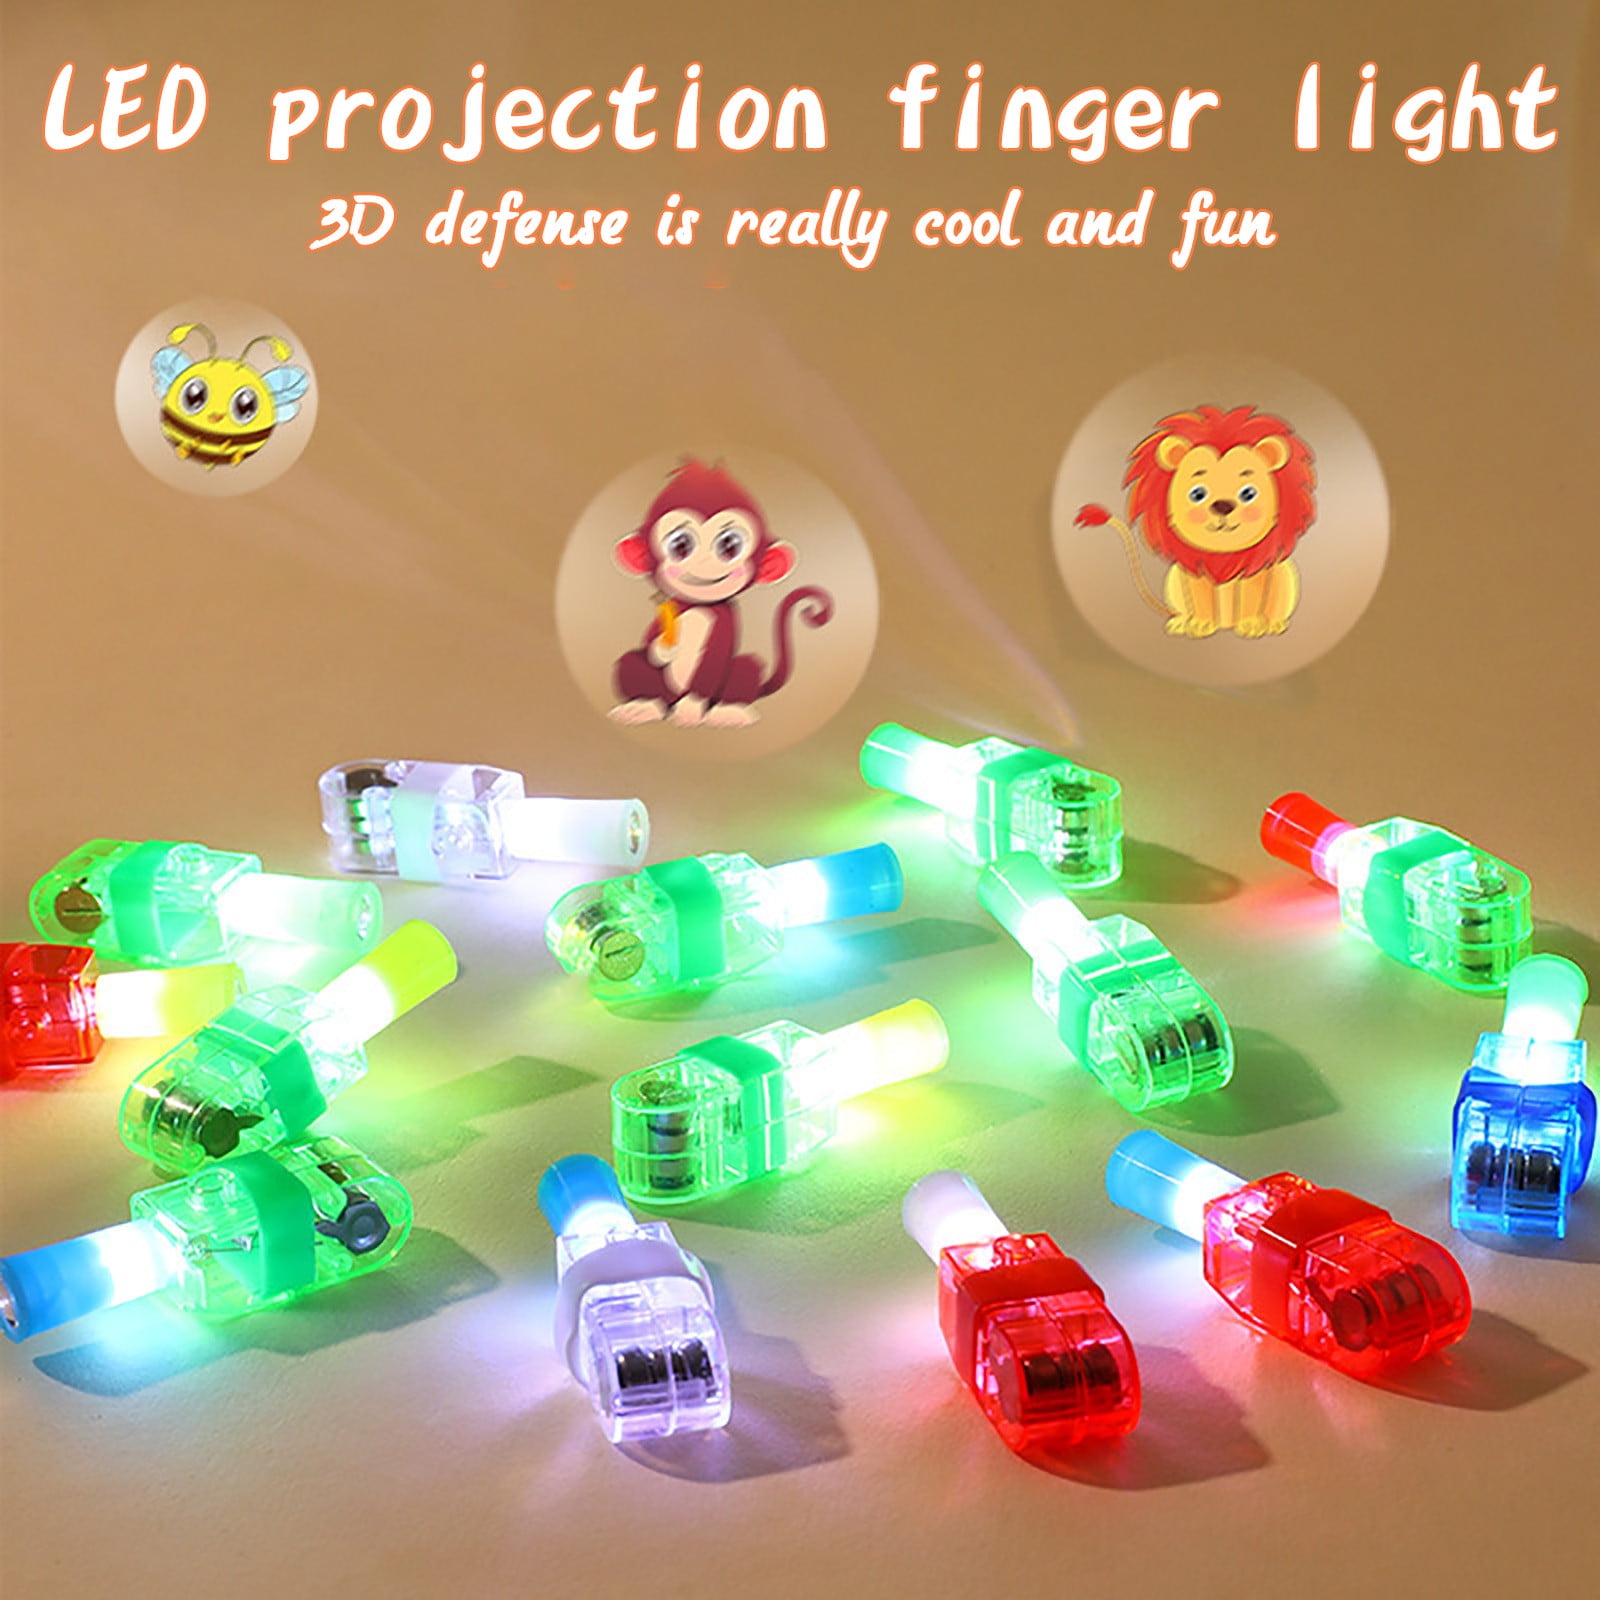 Finger Projection Lamp